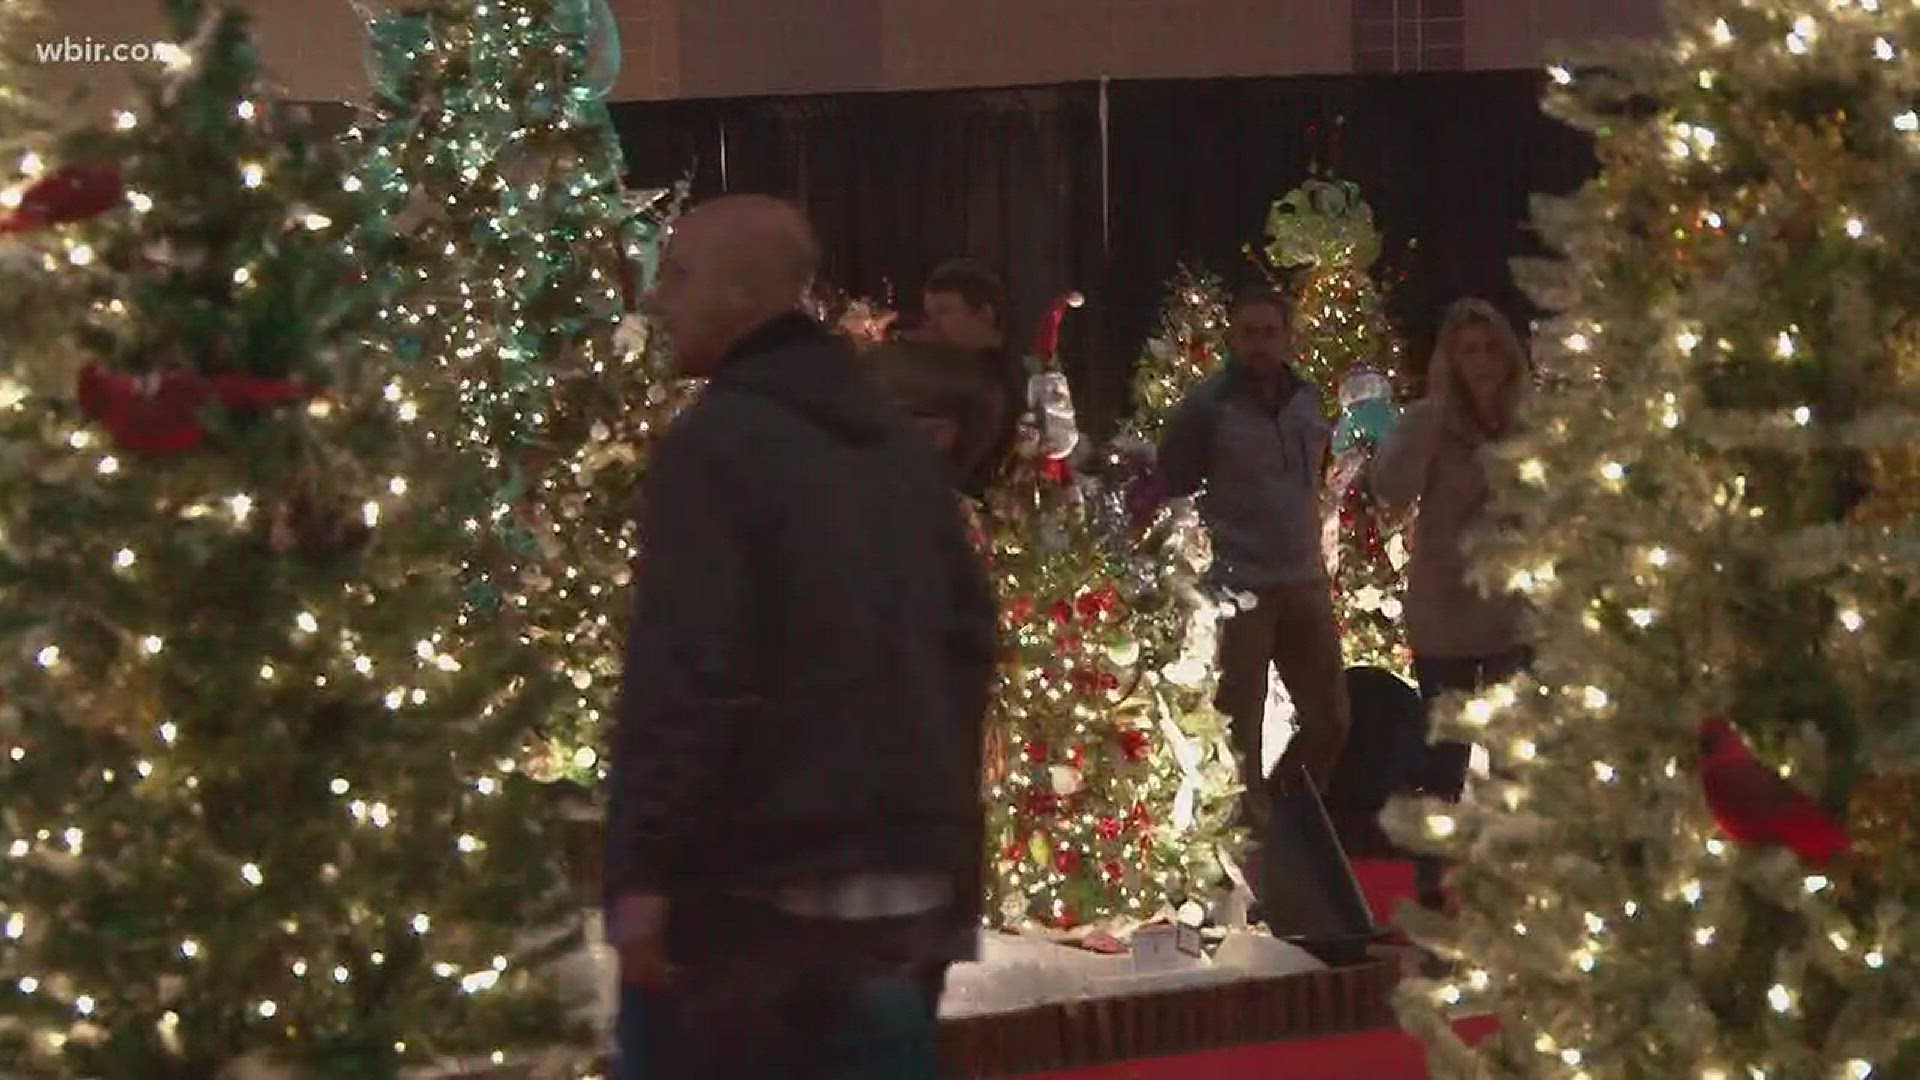 Nov. 23, 2017: After the turkey dinner, many people in Knoxville went to Fantasy of Trees to walk off some of that meal and get in the holiday spirit.